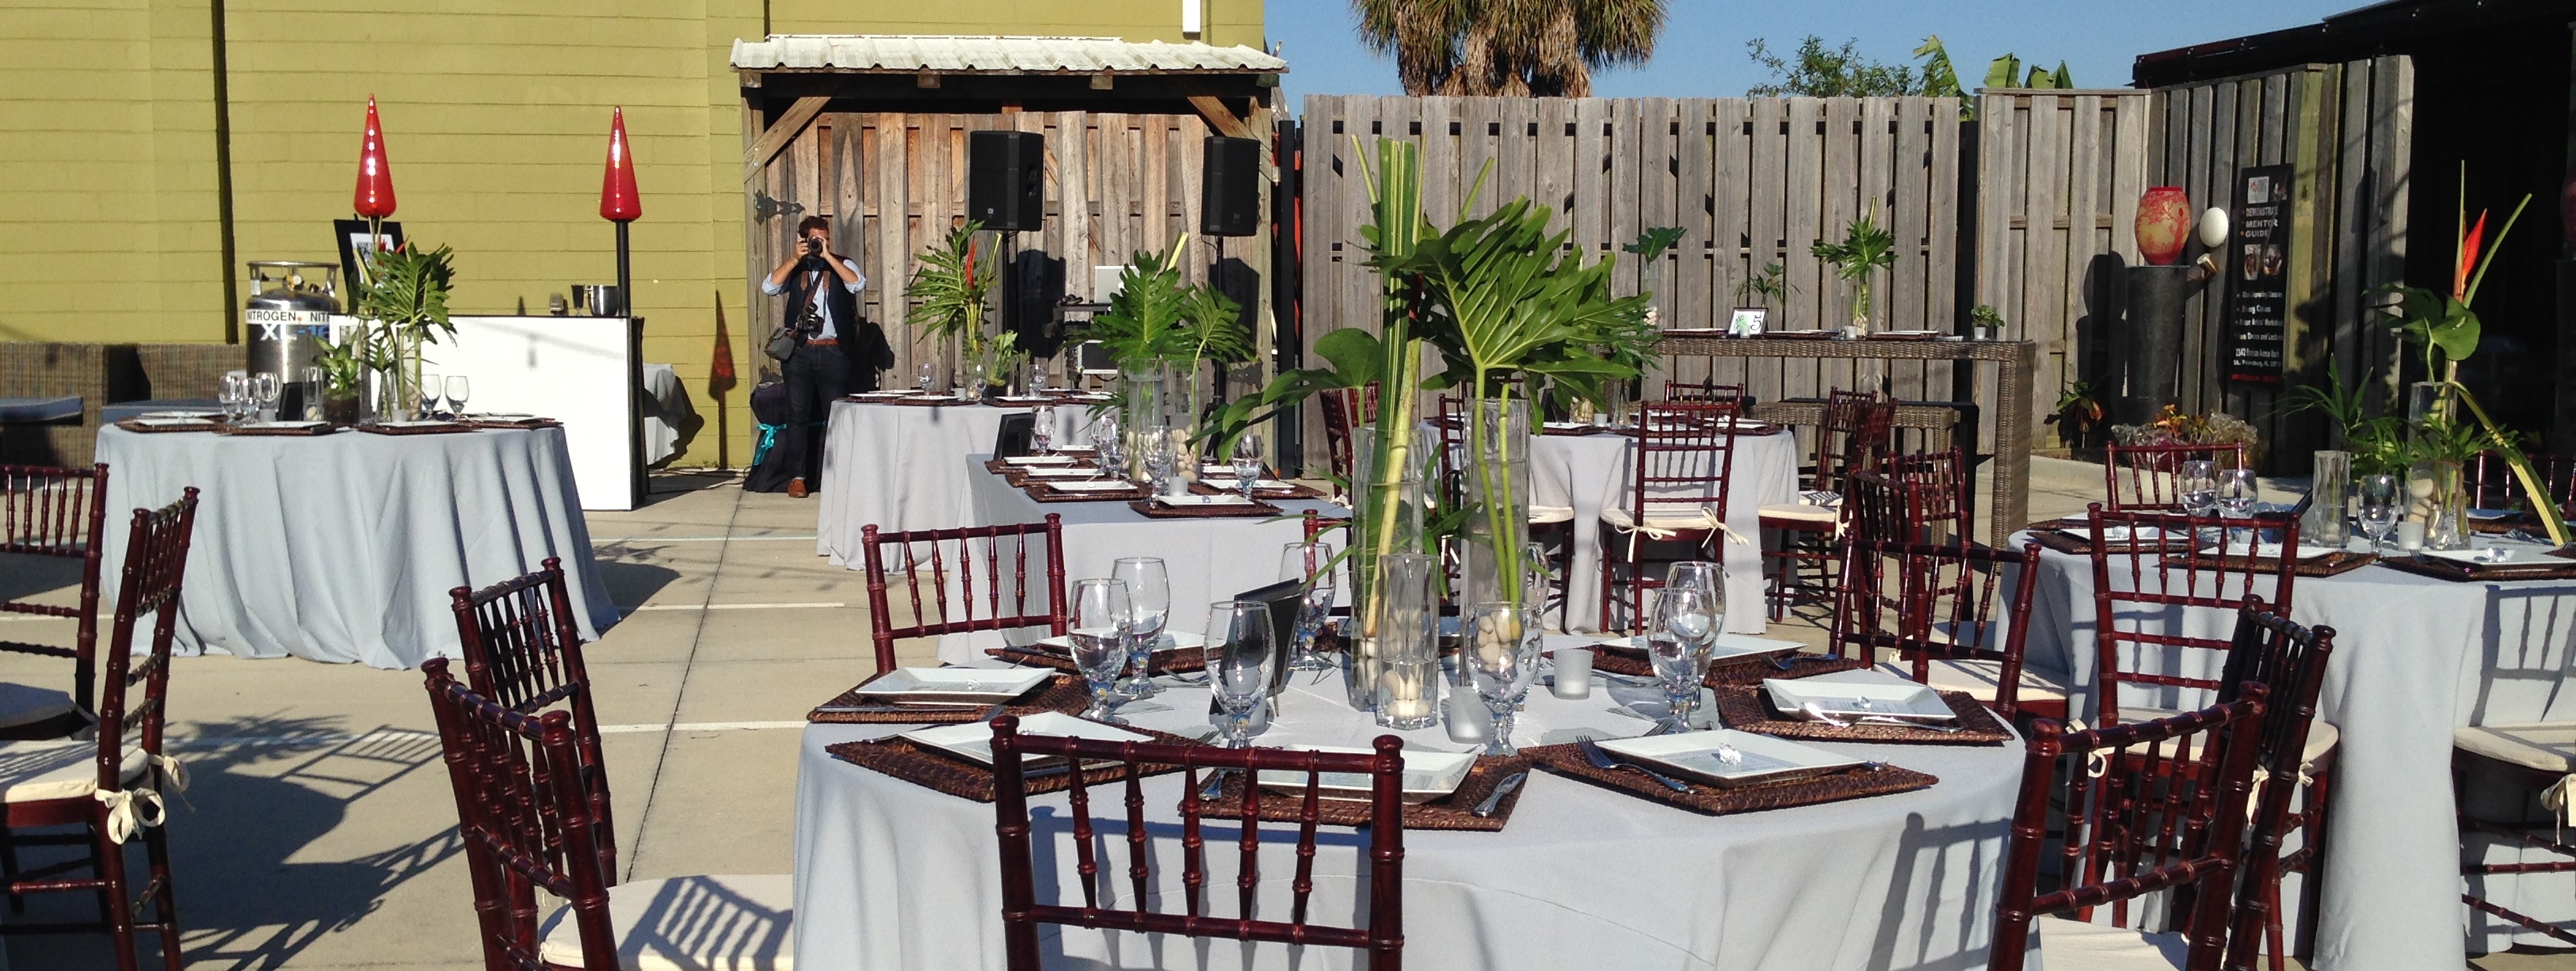 Check out our one of a kind outdoor event space